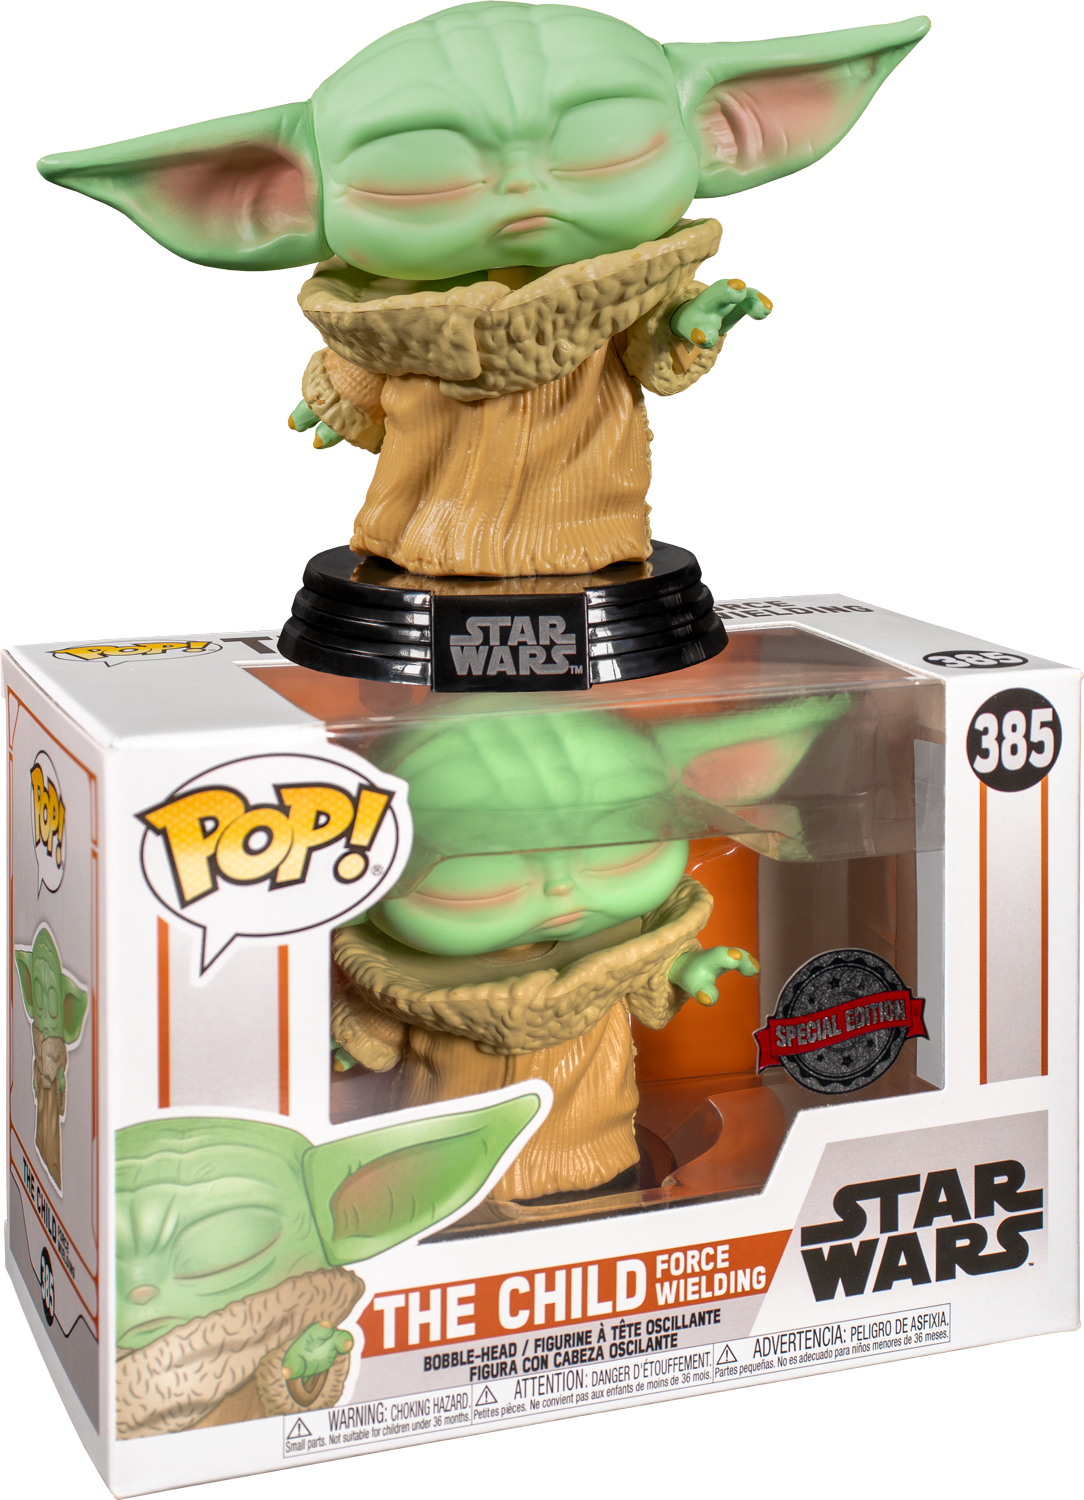 Funko Pop! Star Wars: The Mandalorian - The Child (Baby Yoda) Force Wielding #385 - The Amazing Collectables